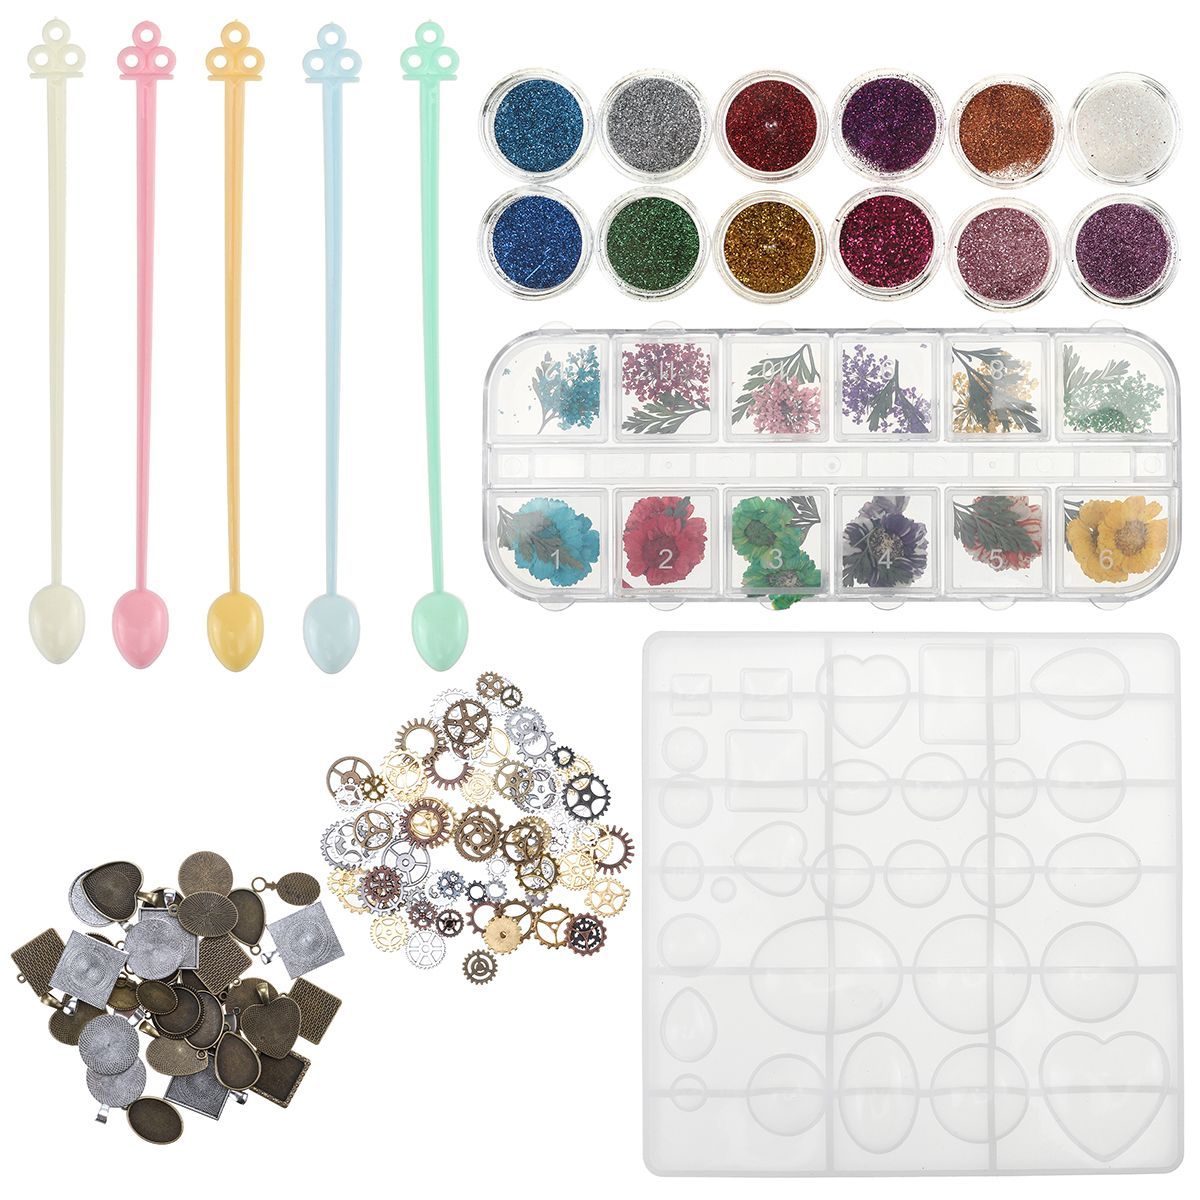 45pcs-Jewelry-Mould-Handmade-Crystal-Glue-DIY-Mould-Set-Resin-Silicone-Mold-1739569